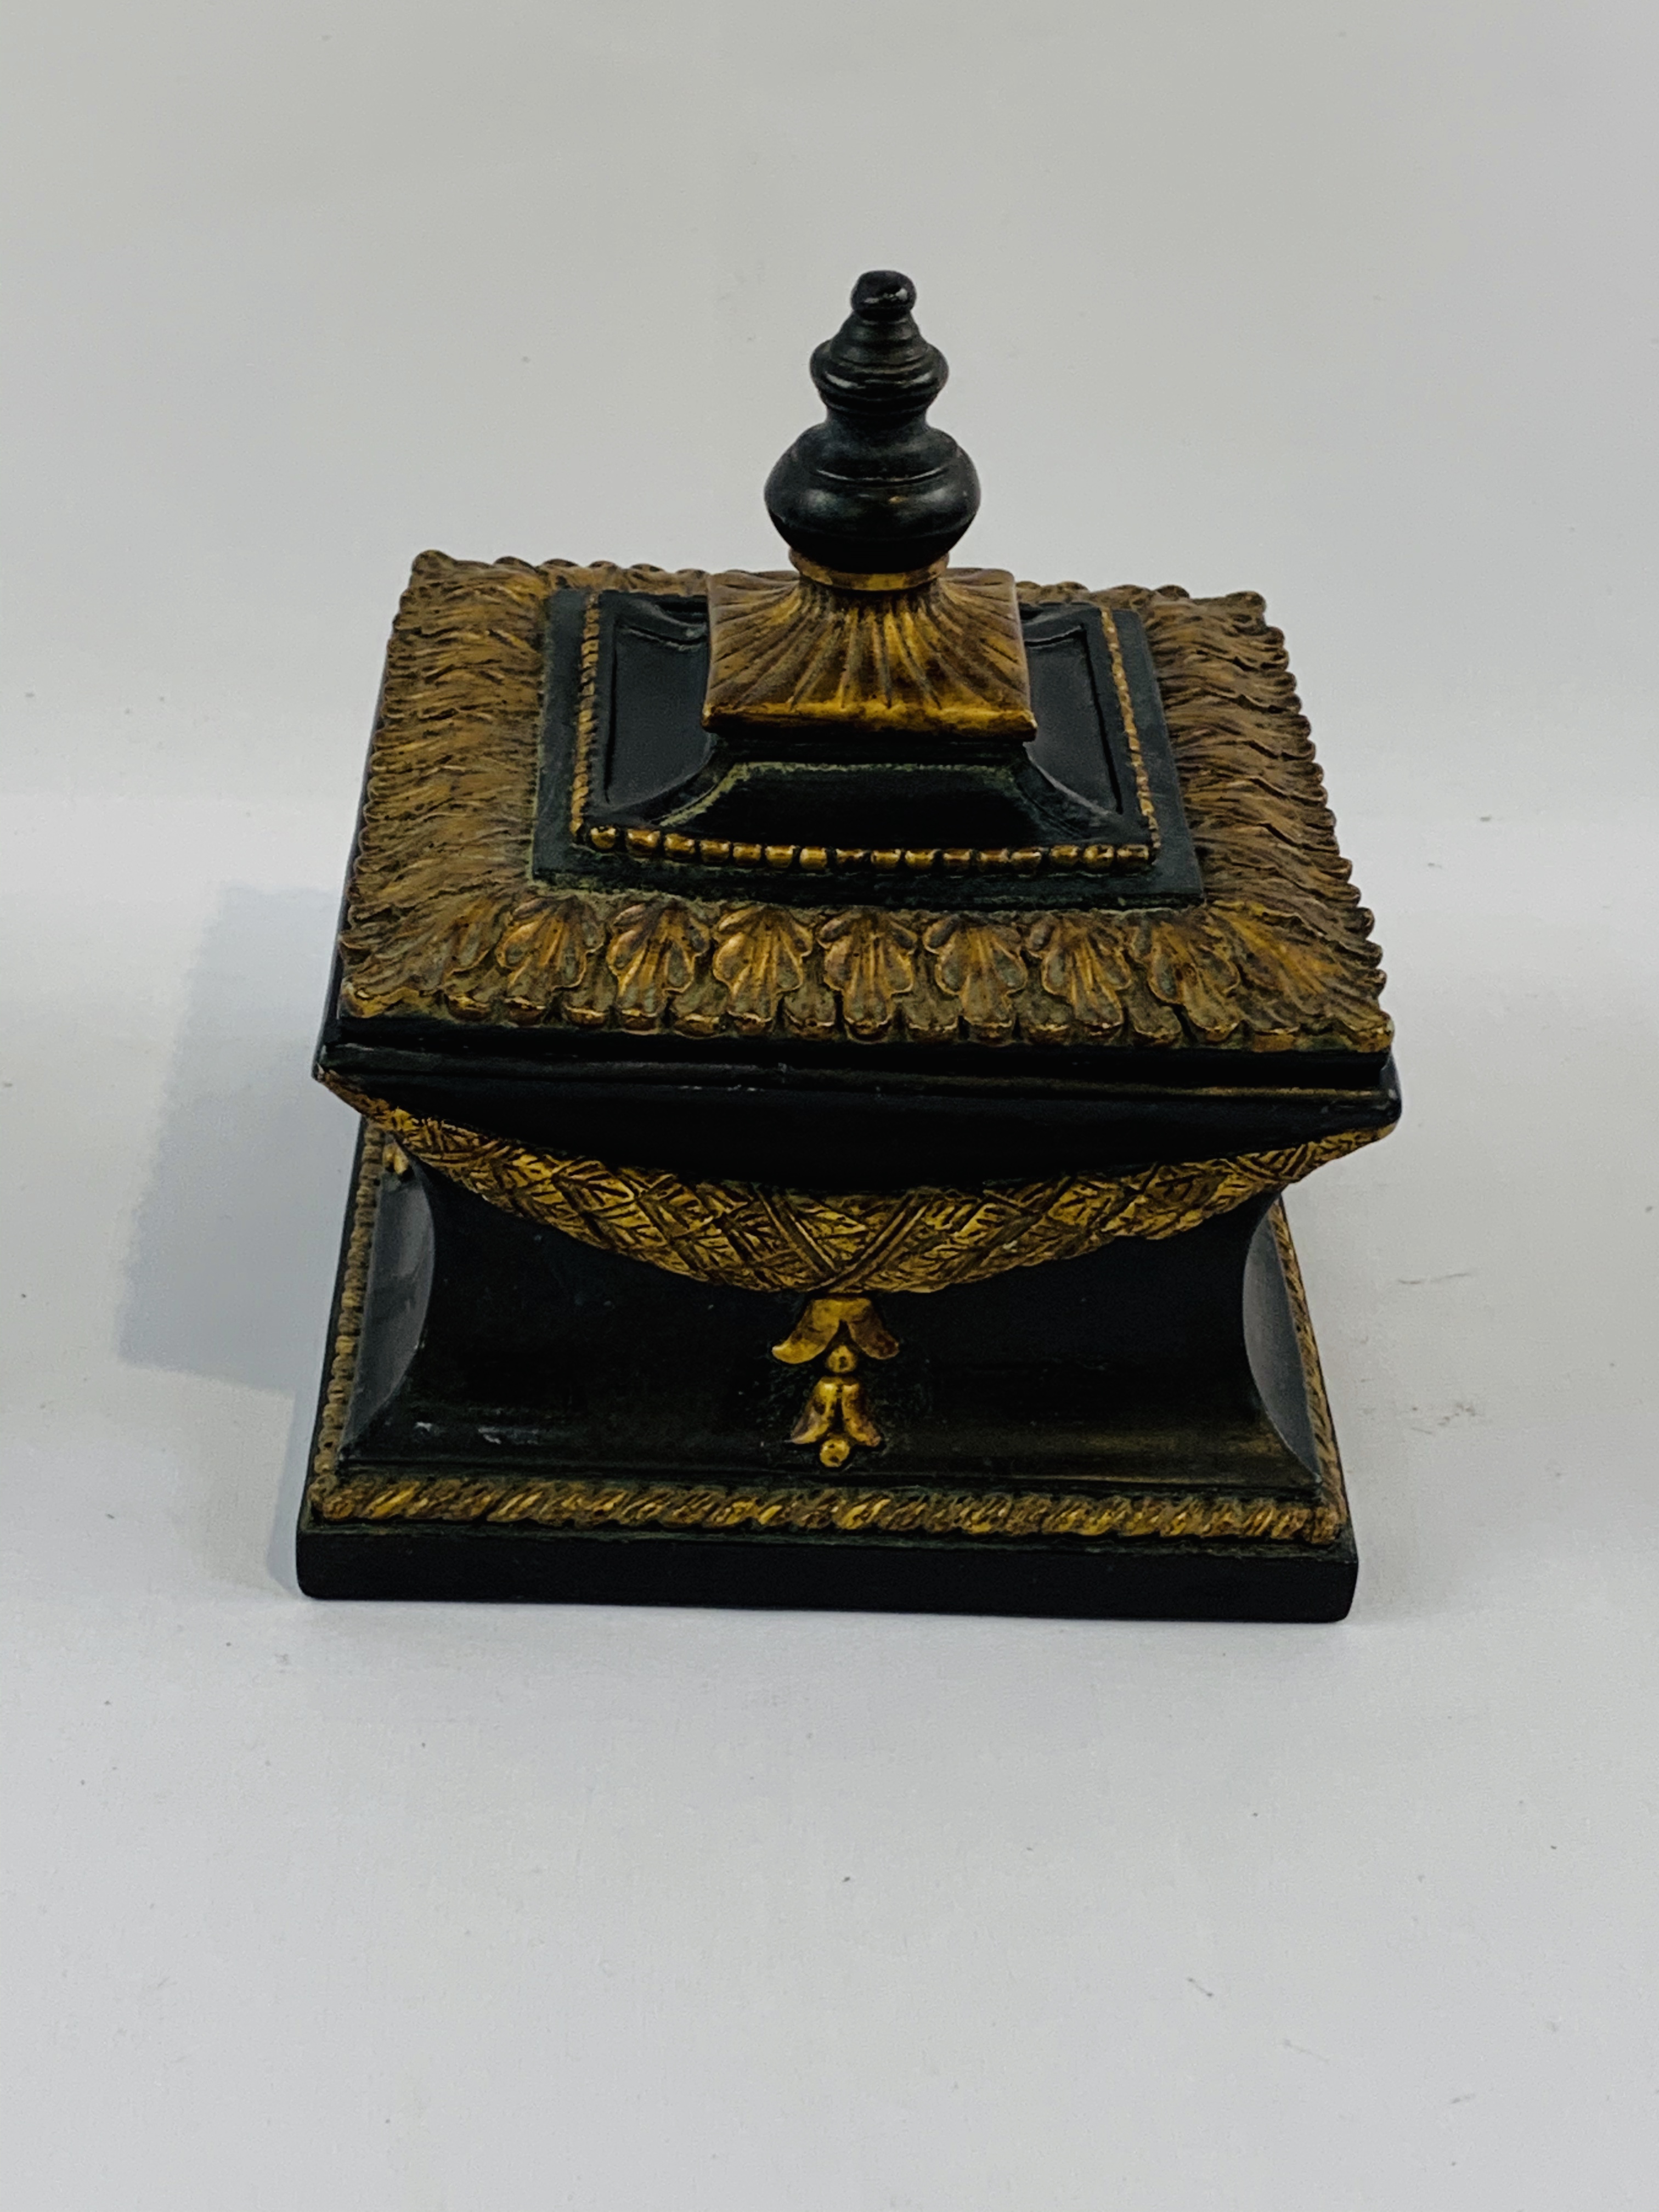 Vintage Baroque style gold and black trinket box with ormolu style rim. - Image 2 of 3